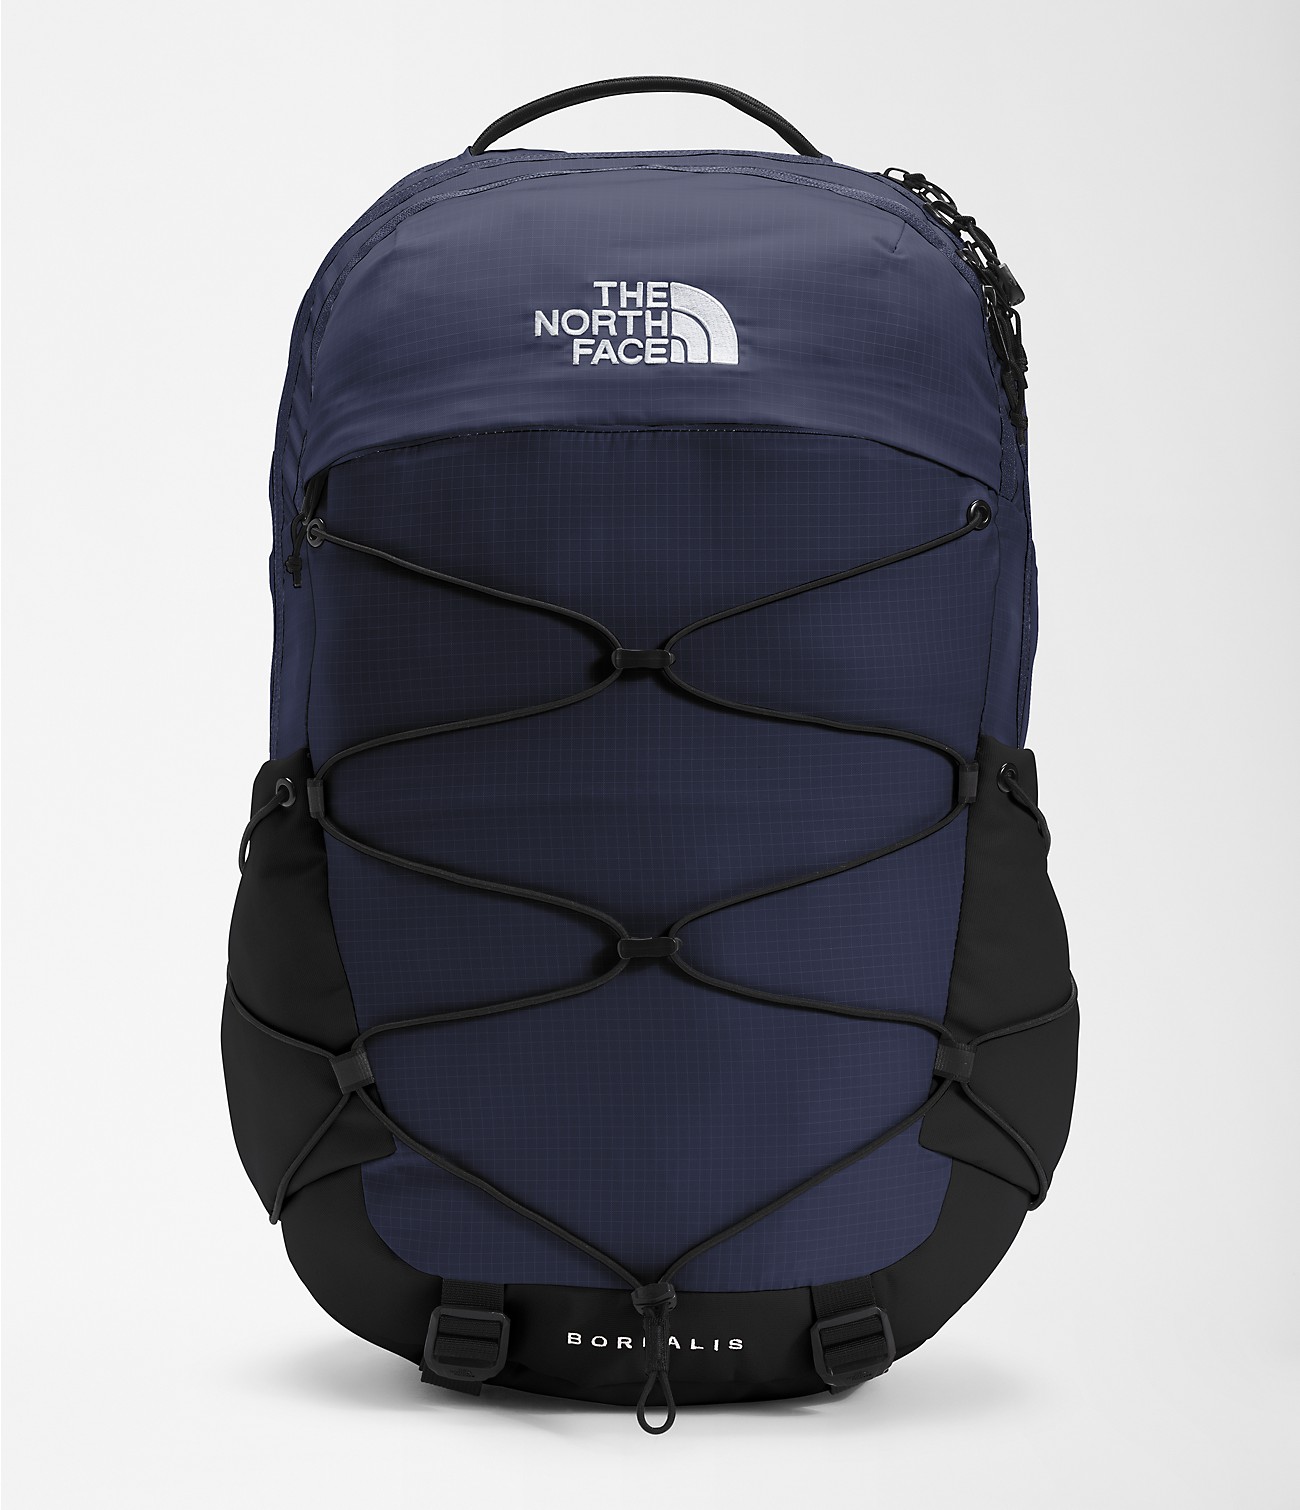 Unlock Wilderness' choice in the North Face Vs JanSport comparison, the Borealis Backpack by The North Face